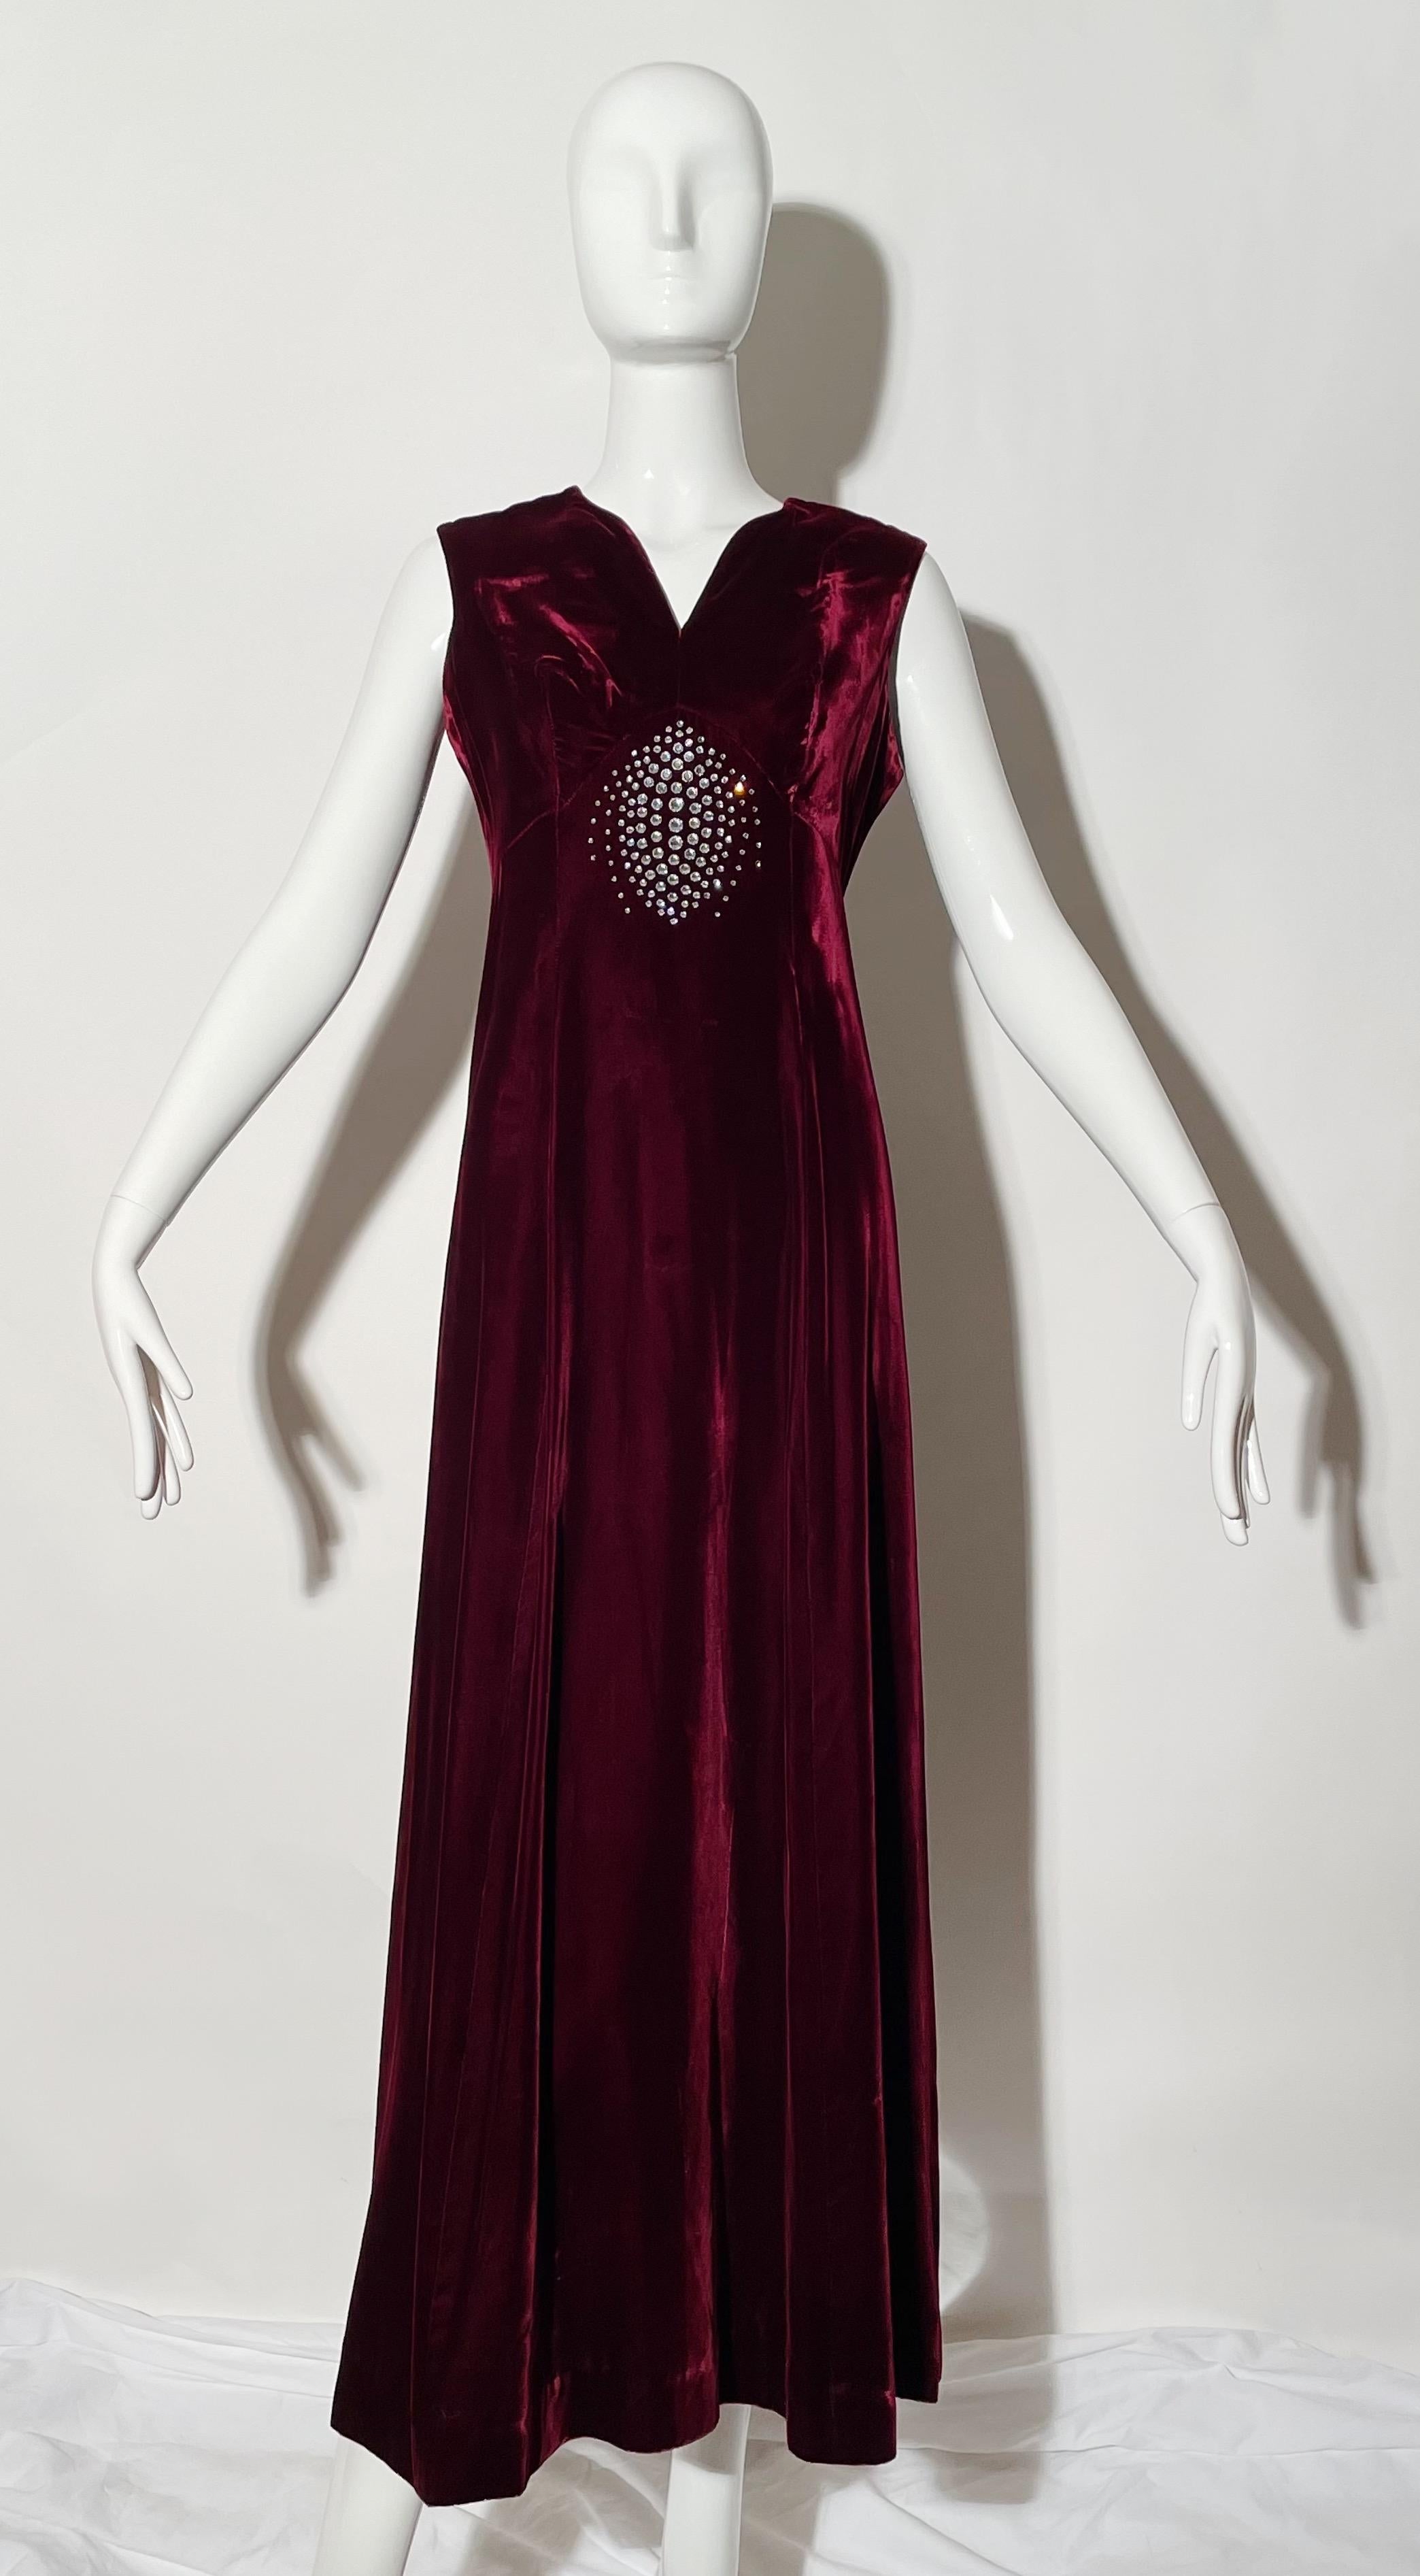 Burgundy velvet gown. Rhinestone detail. Sleeveless. Rear zipper. Lined. 
*Condition: excellent vintage condition. No visible flaws.

Measurements Taken Laying Flat (inches)—
Shoulder to Shoulder: 14 in.
Bust: 12 in.
Waist: 28 in.
Hip: 32